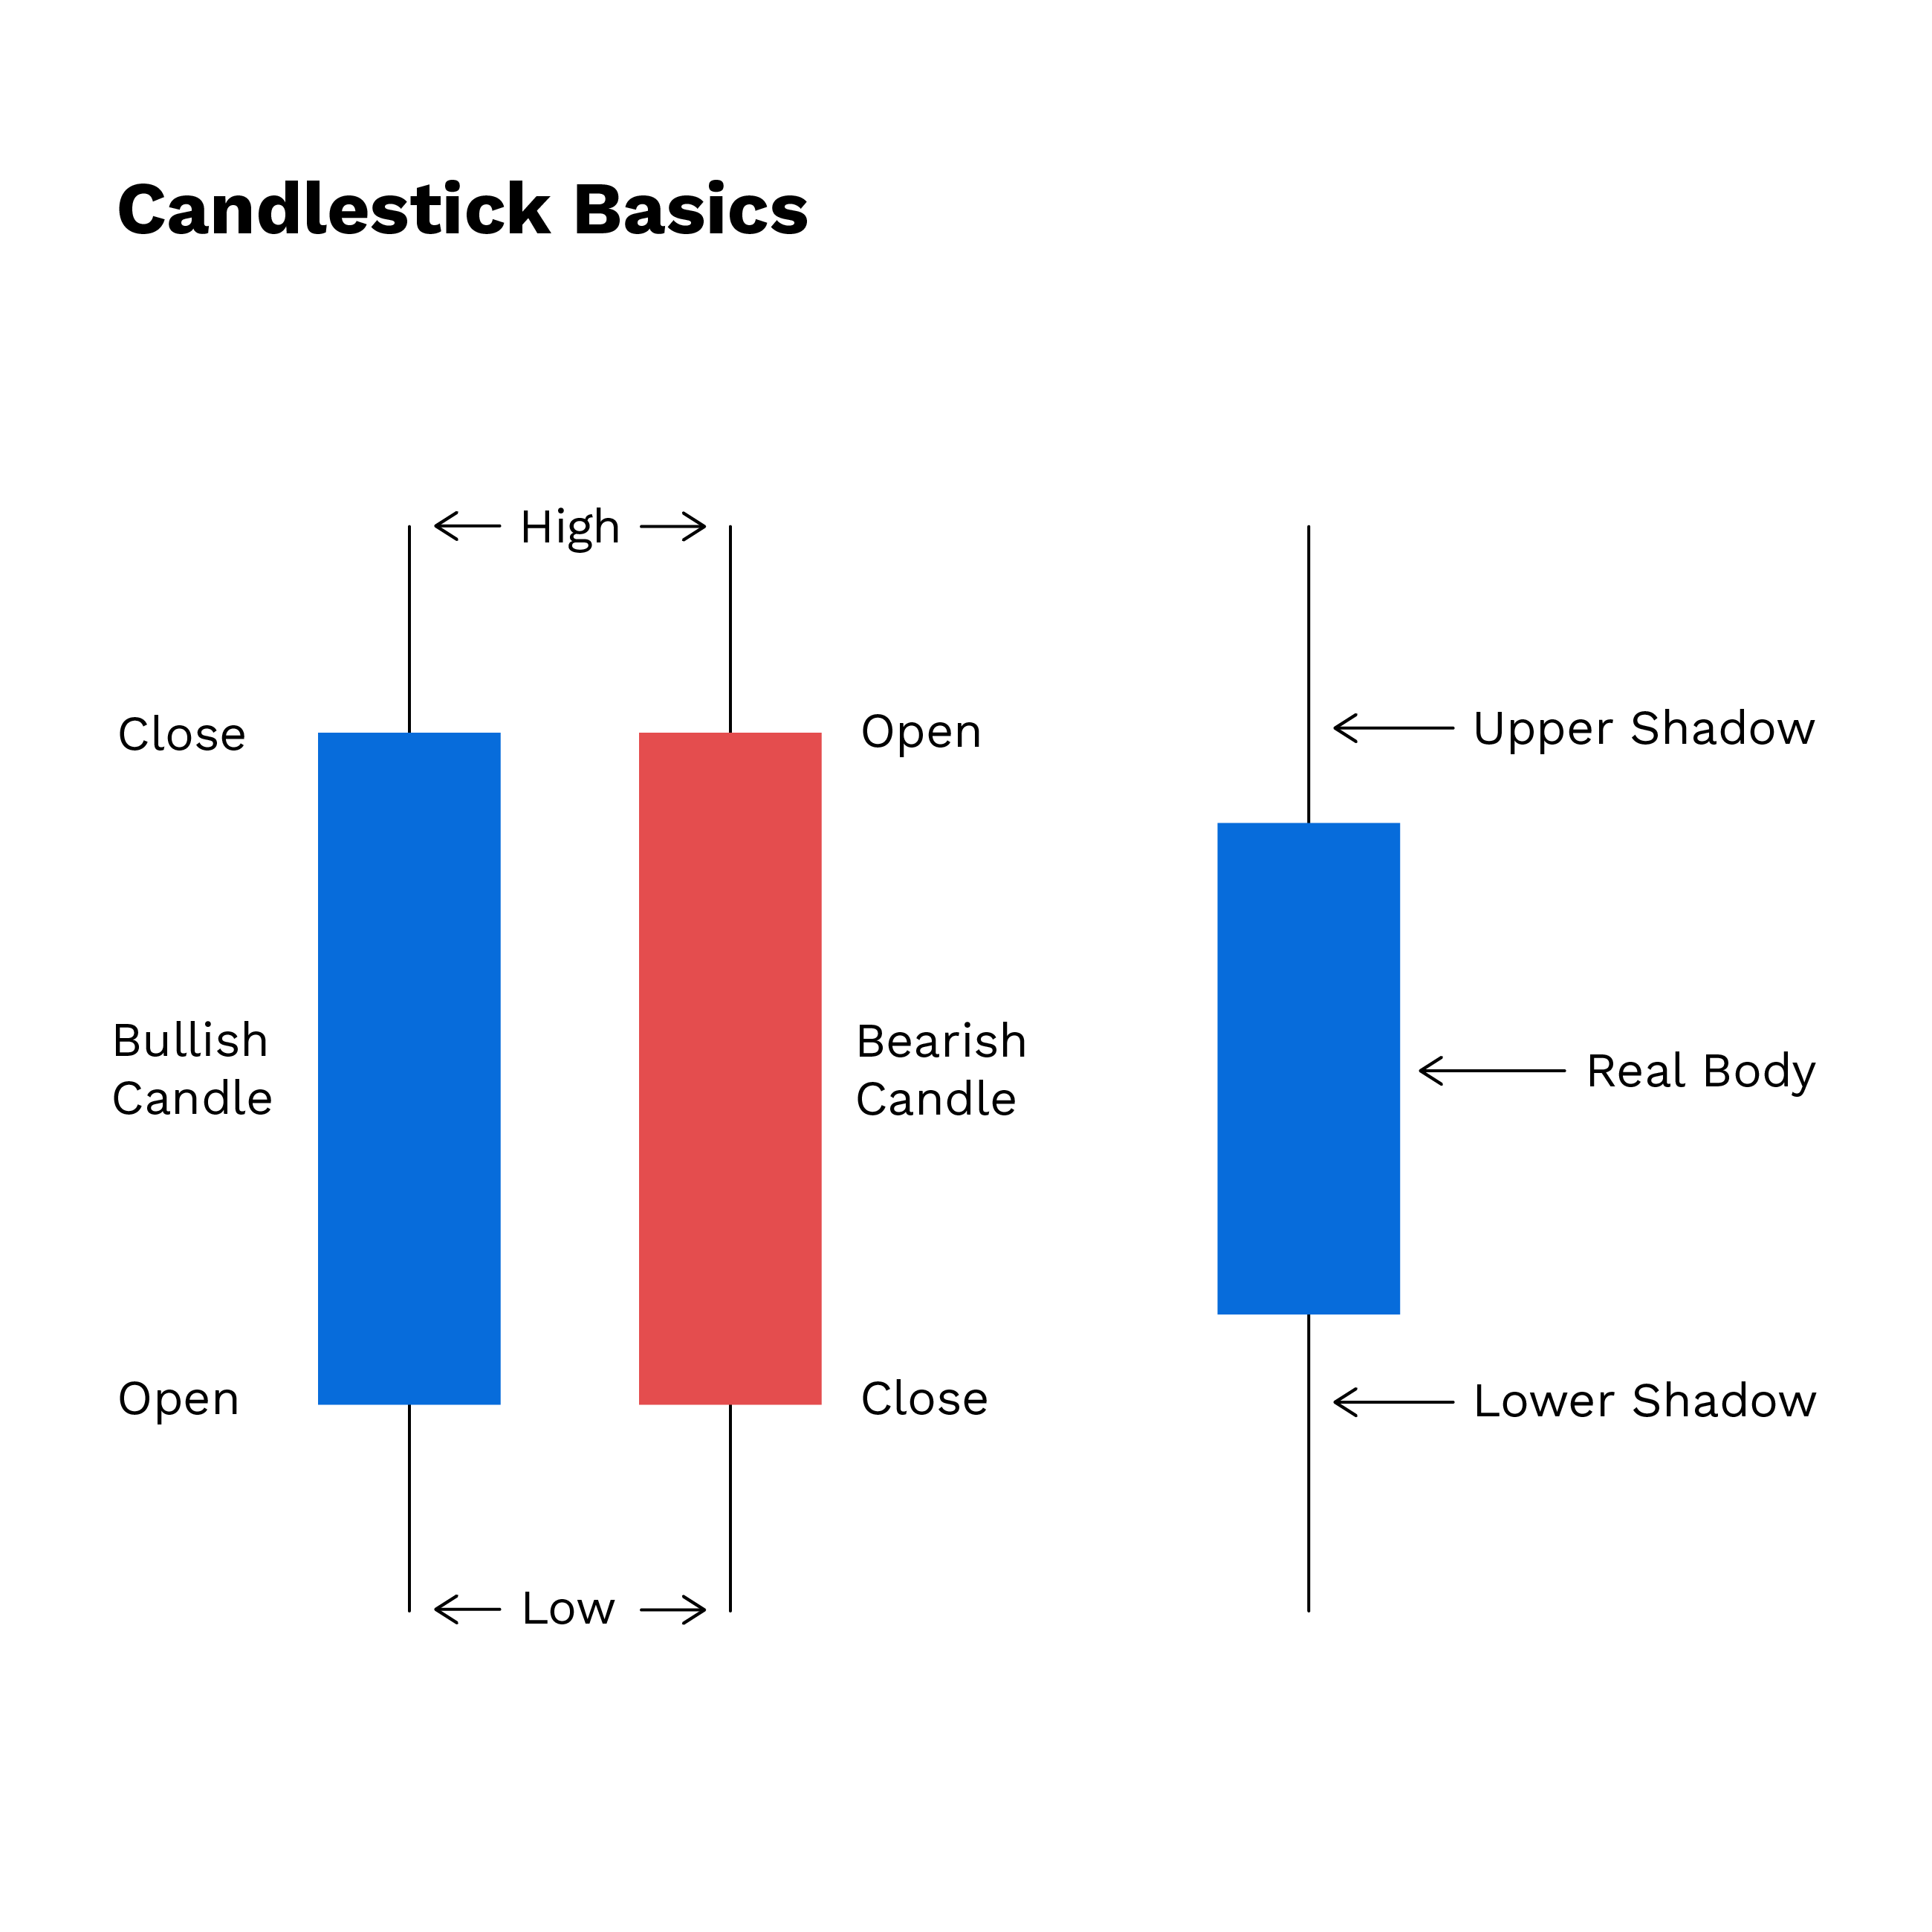 where to buy candlesticks